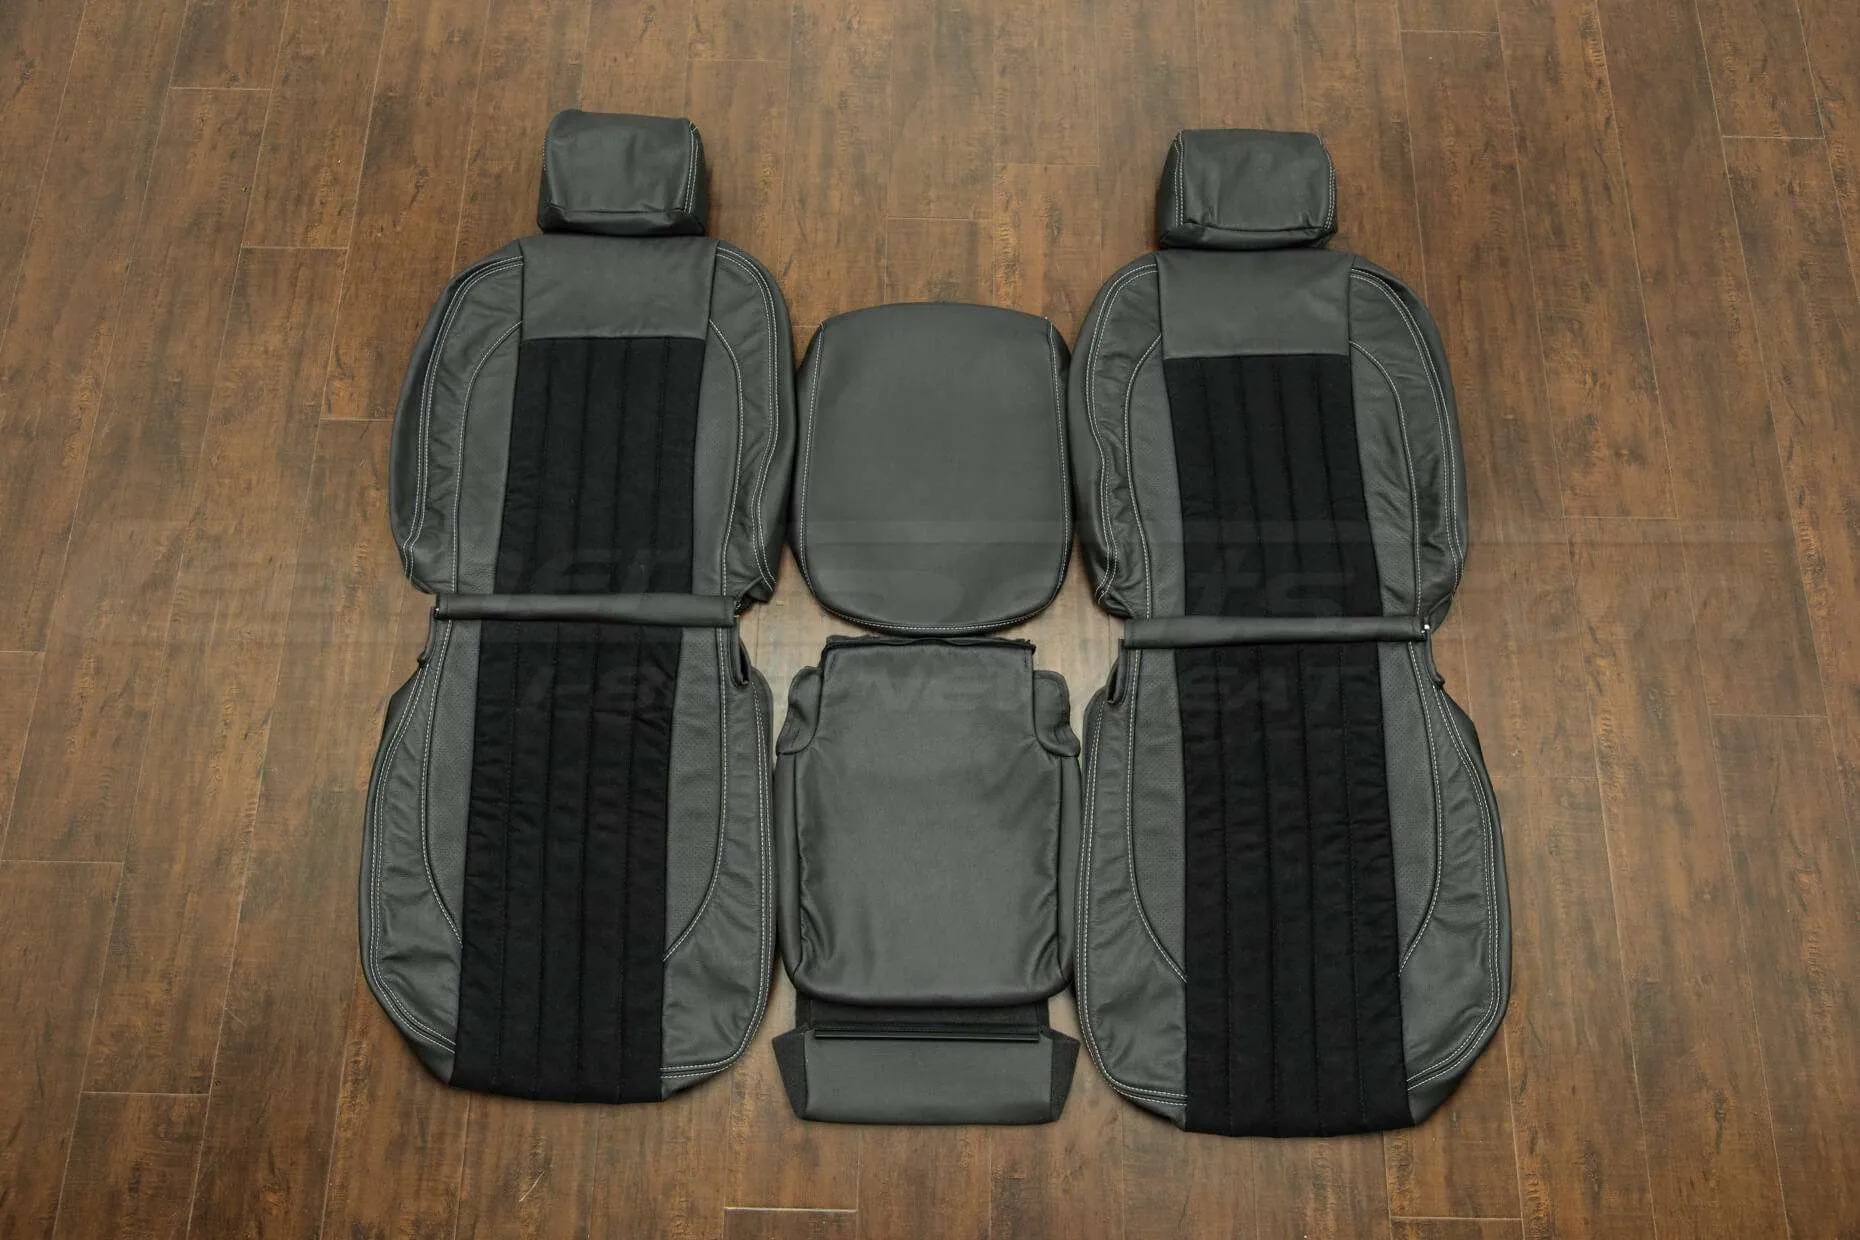 2002-2005 Dodge Ram Upholstery Kit - Dark Graphite & Black Suede - Front seat upholstery with console